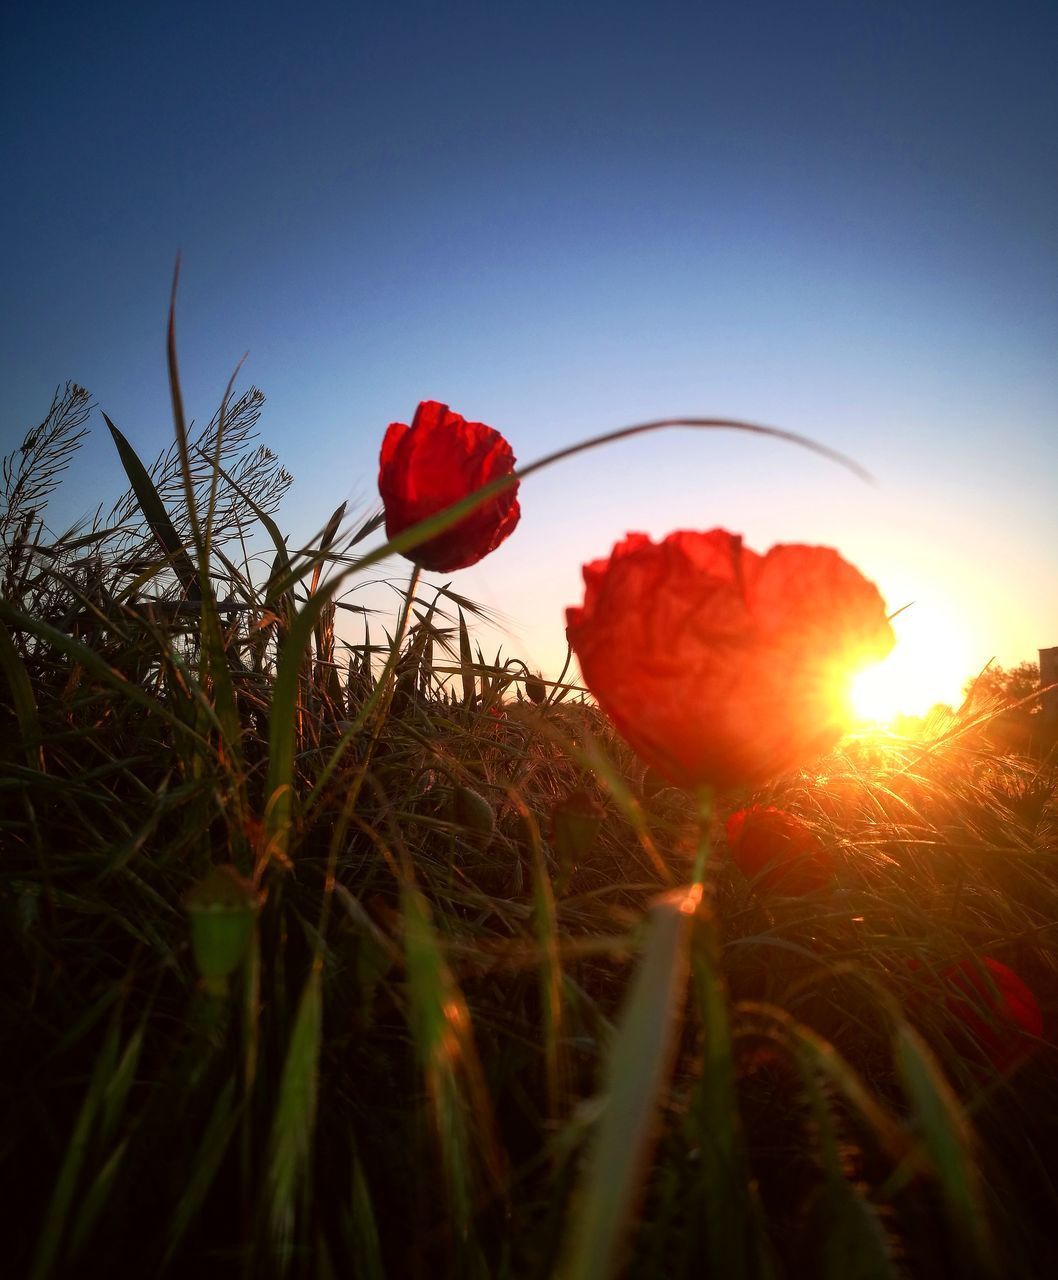 CLOSE-UP OF RED POPPY FLOWERS AGAINST SKY